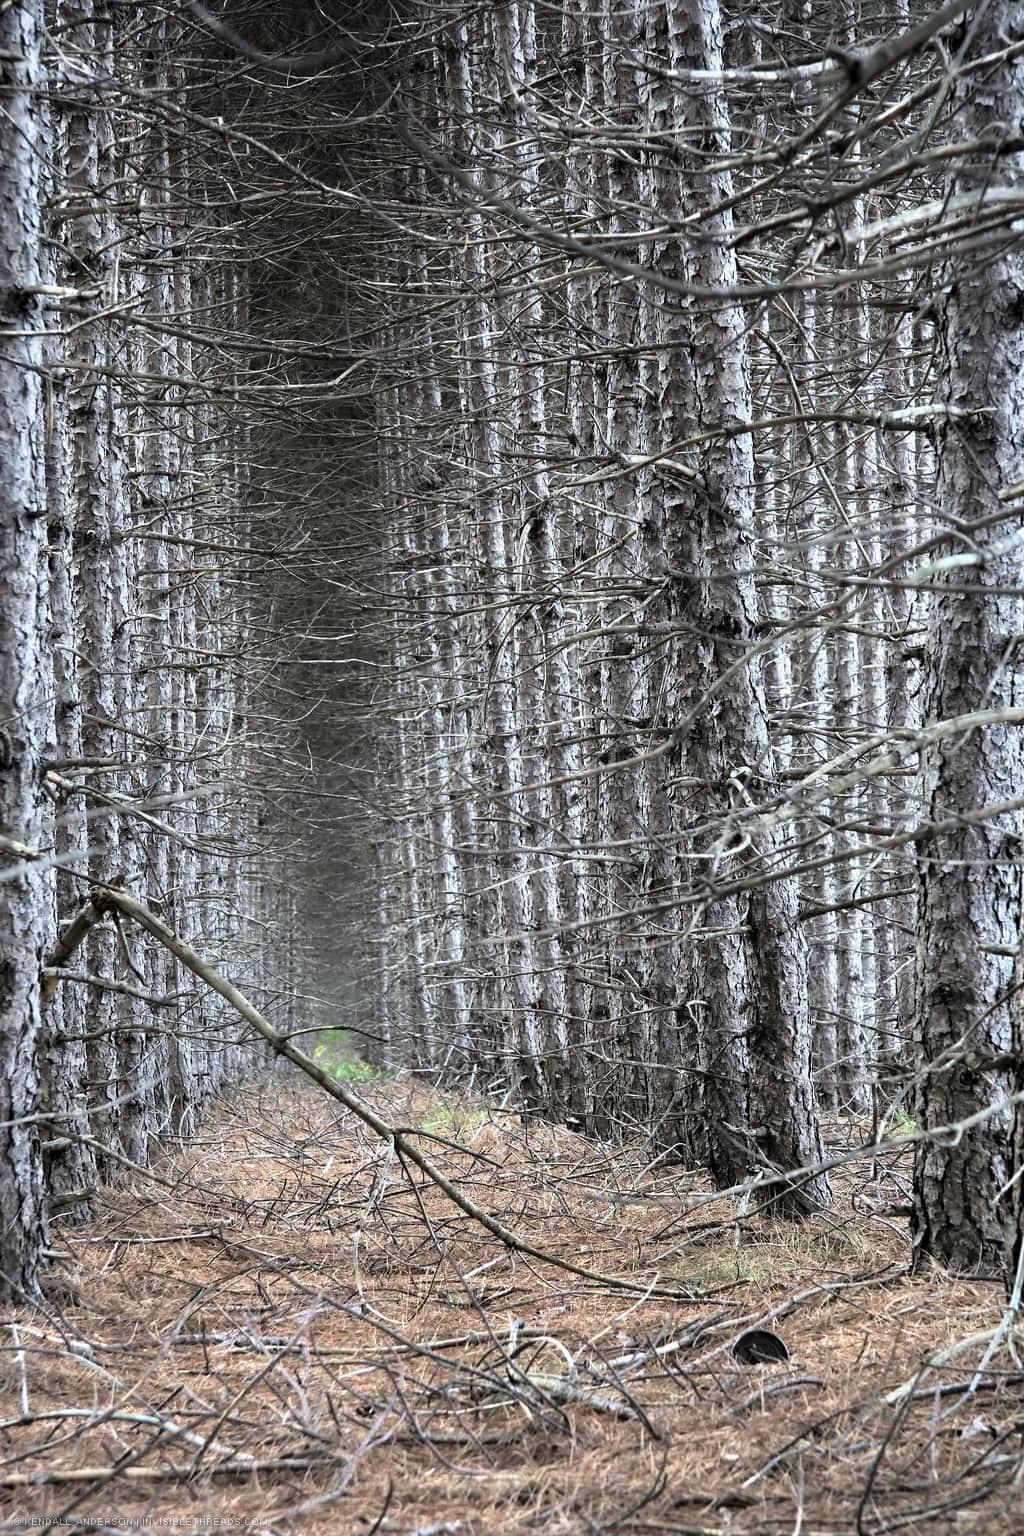 A dense forest of white bark tall trees arranged in ordered rows.